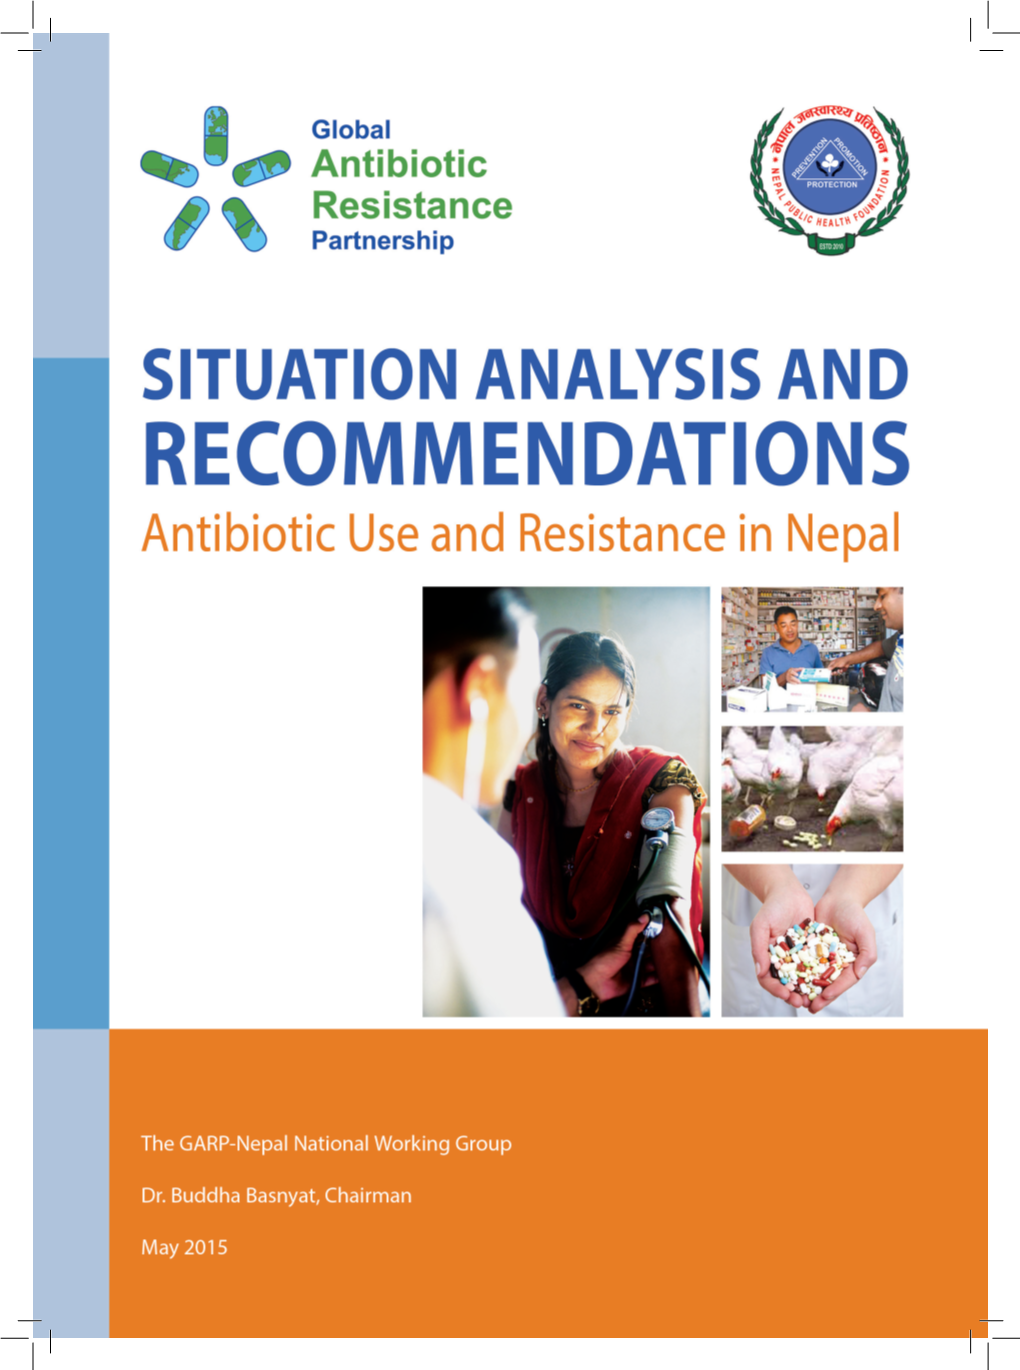 Situation Analysis and Recommendations: Antibiotic Use